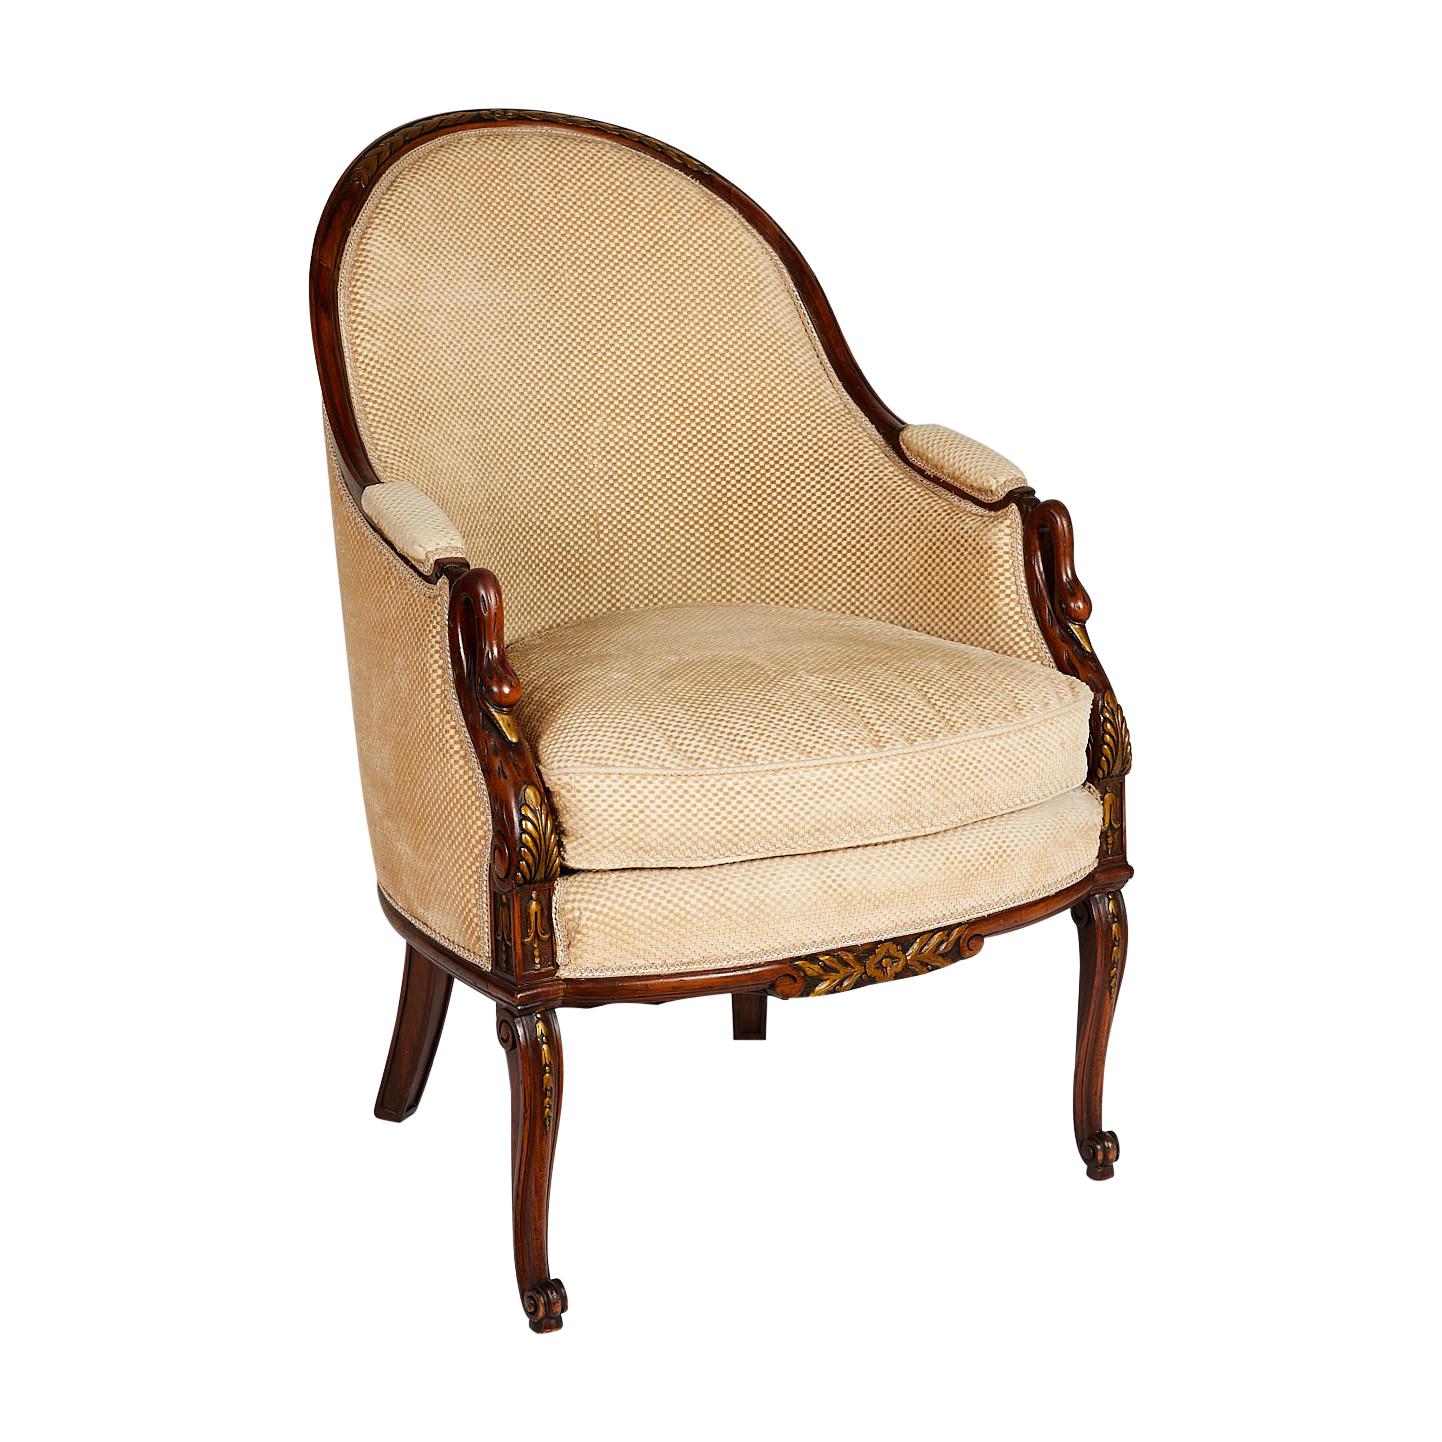 French Empire Style Swan Arm Tub Chair